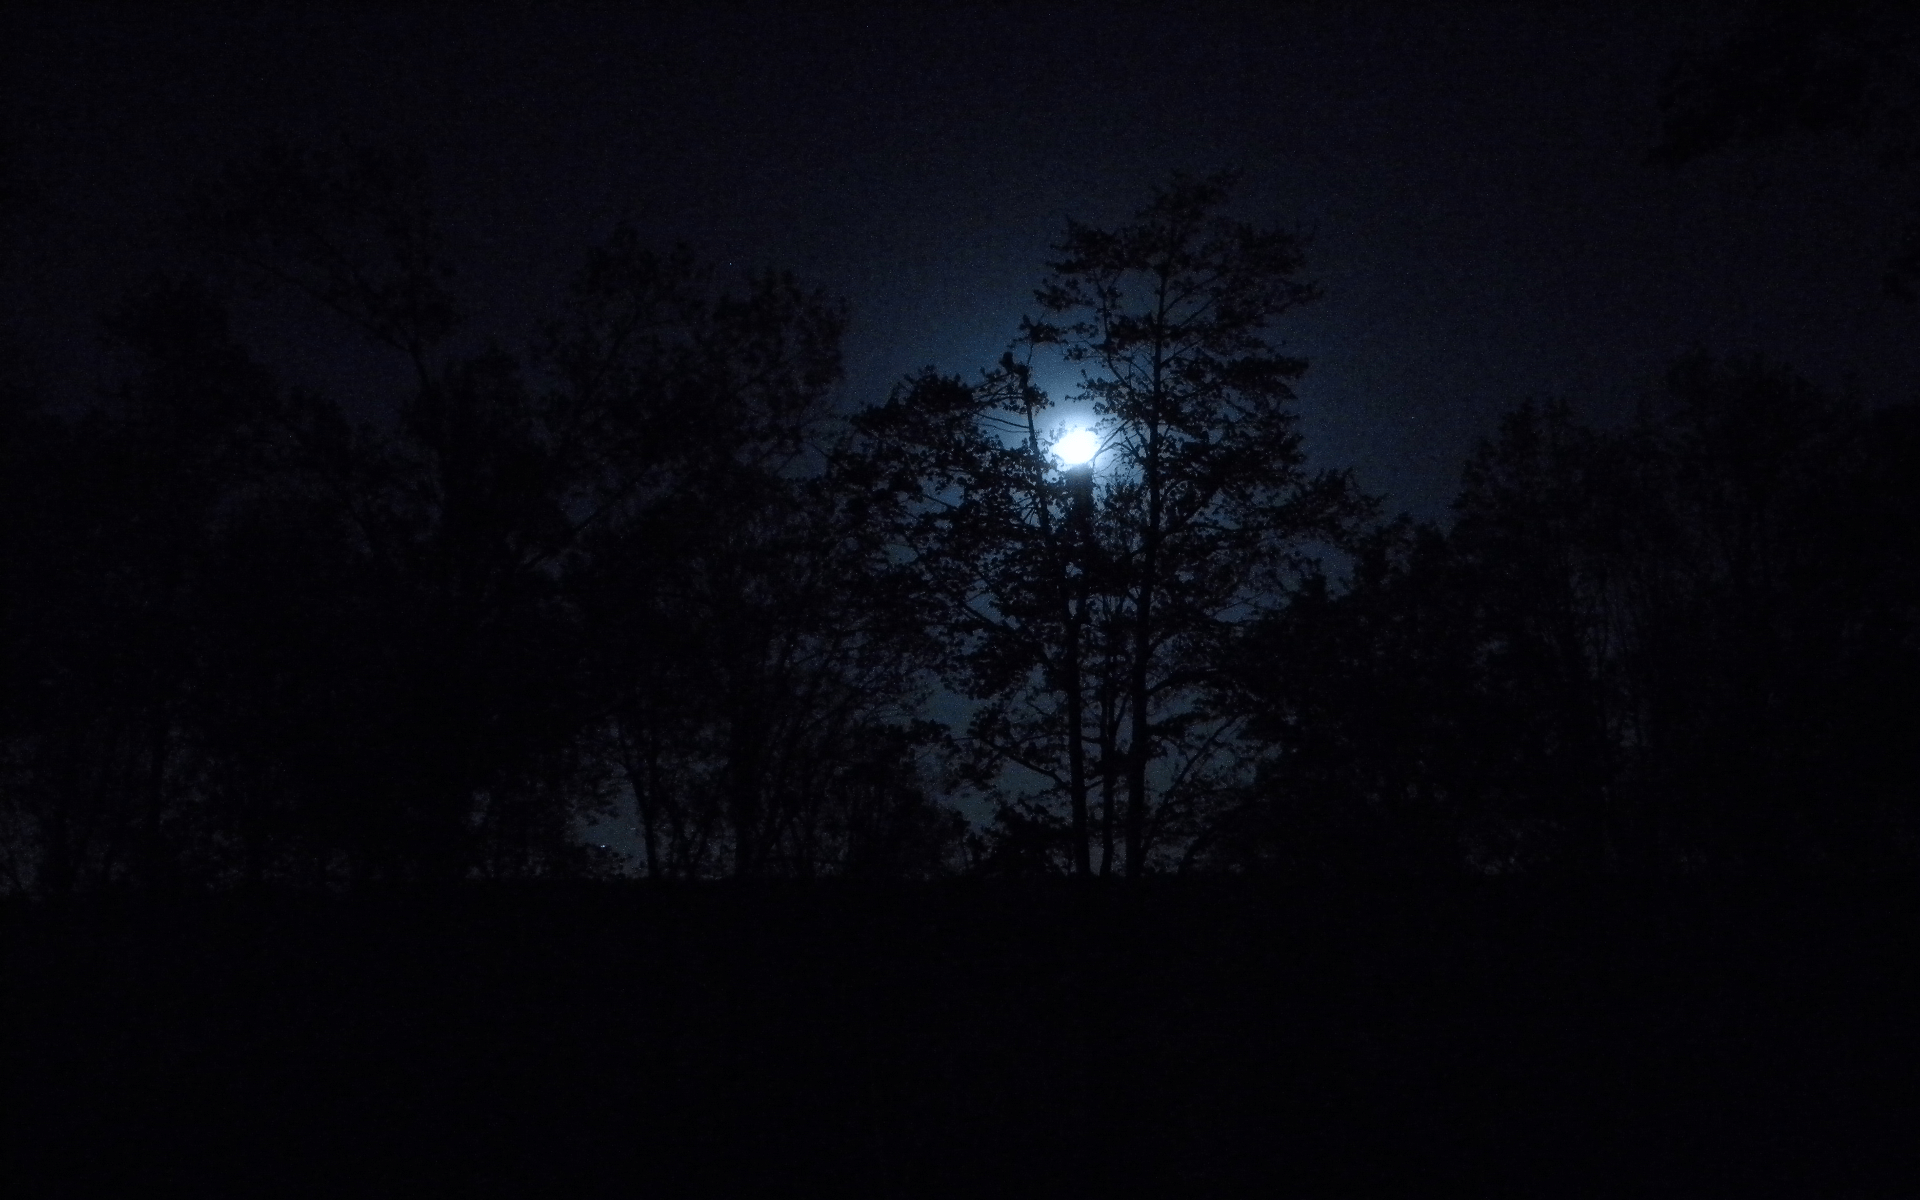 Dark Forests at Night. Nature trees dark night forest moon